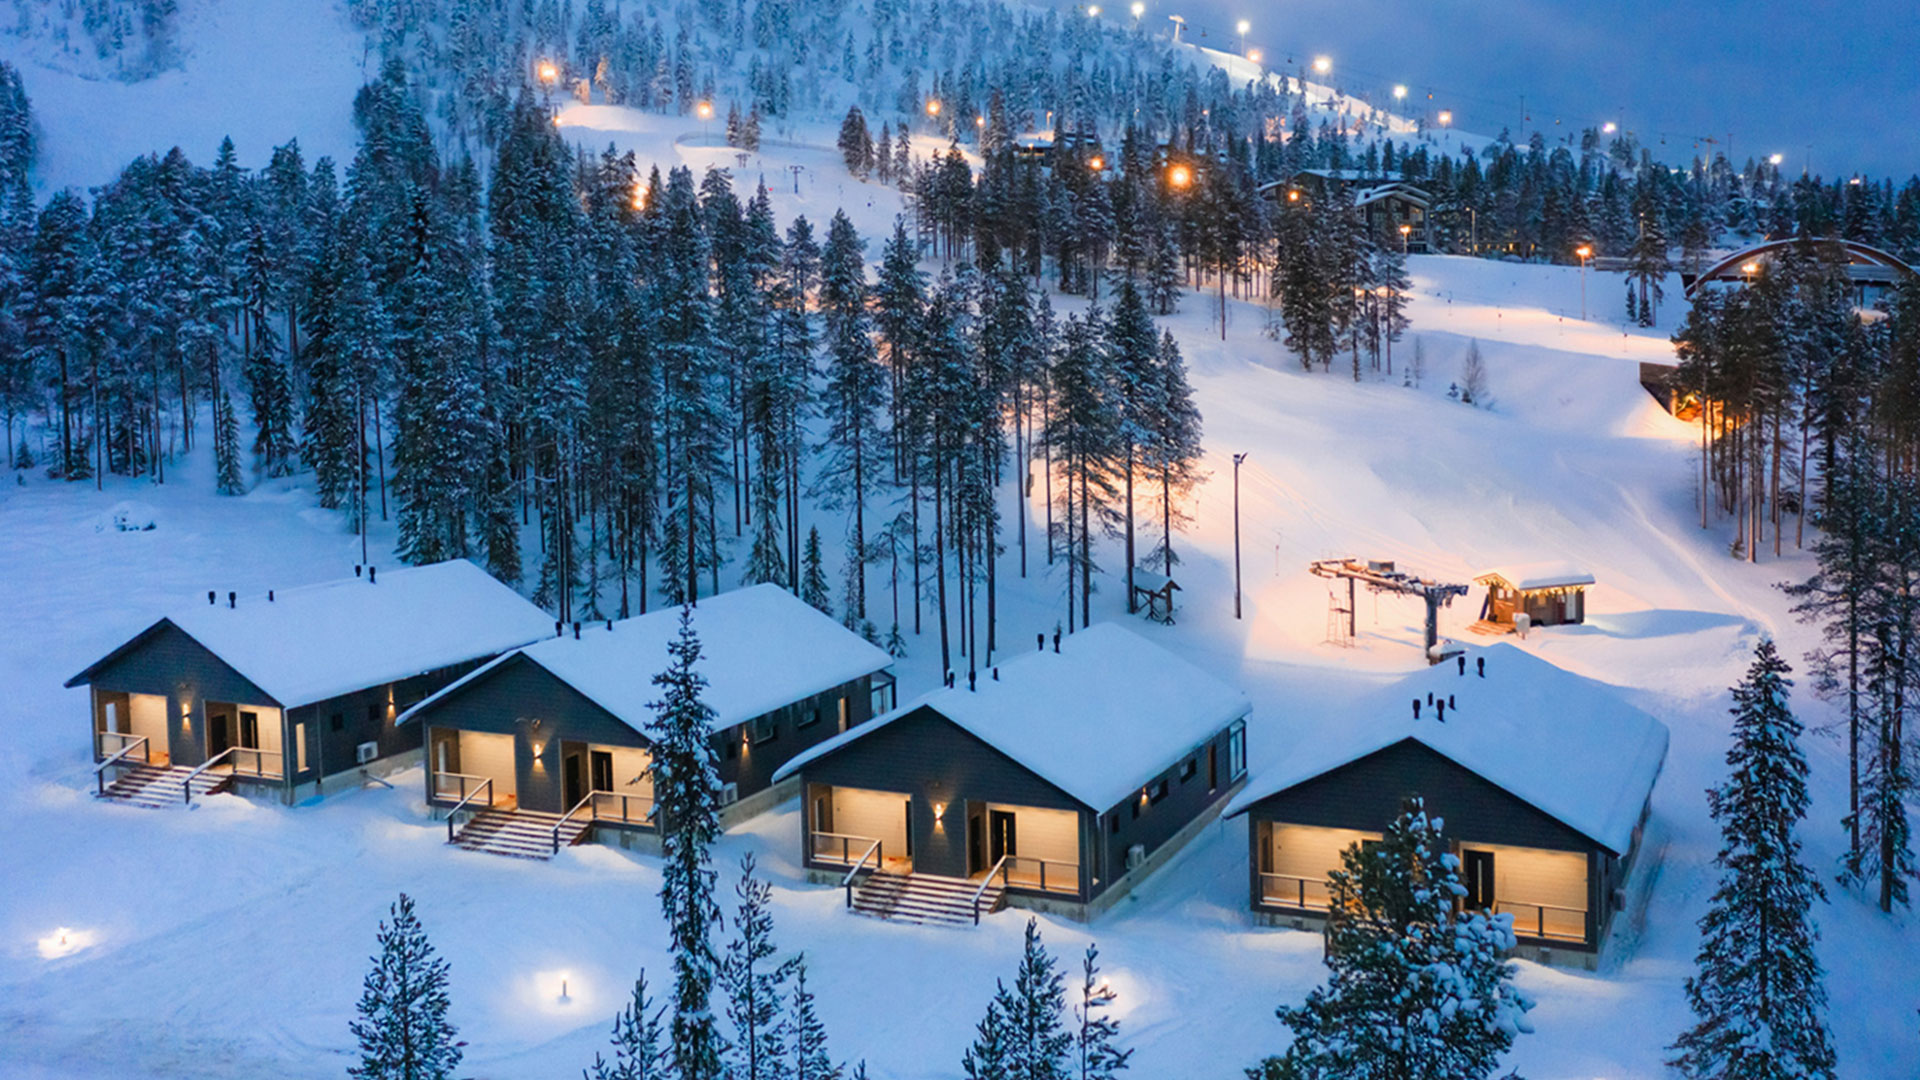 For a trip that’s truly magical, head to Lapland and meet Santa himself